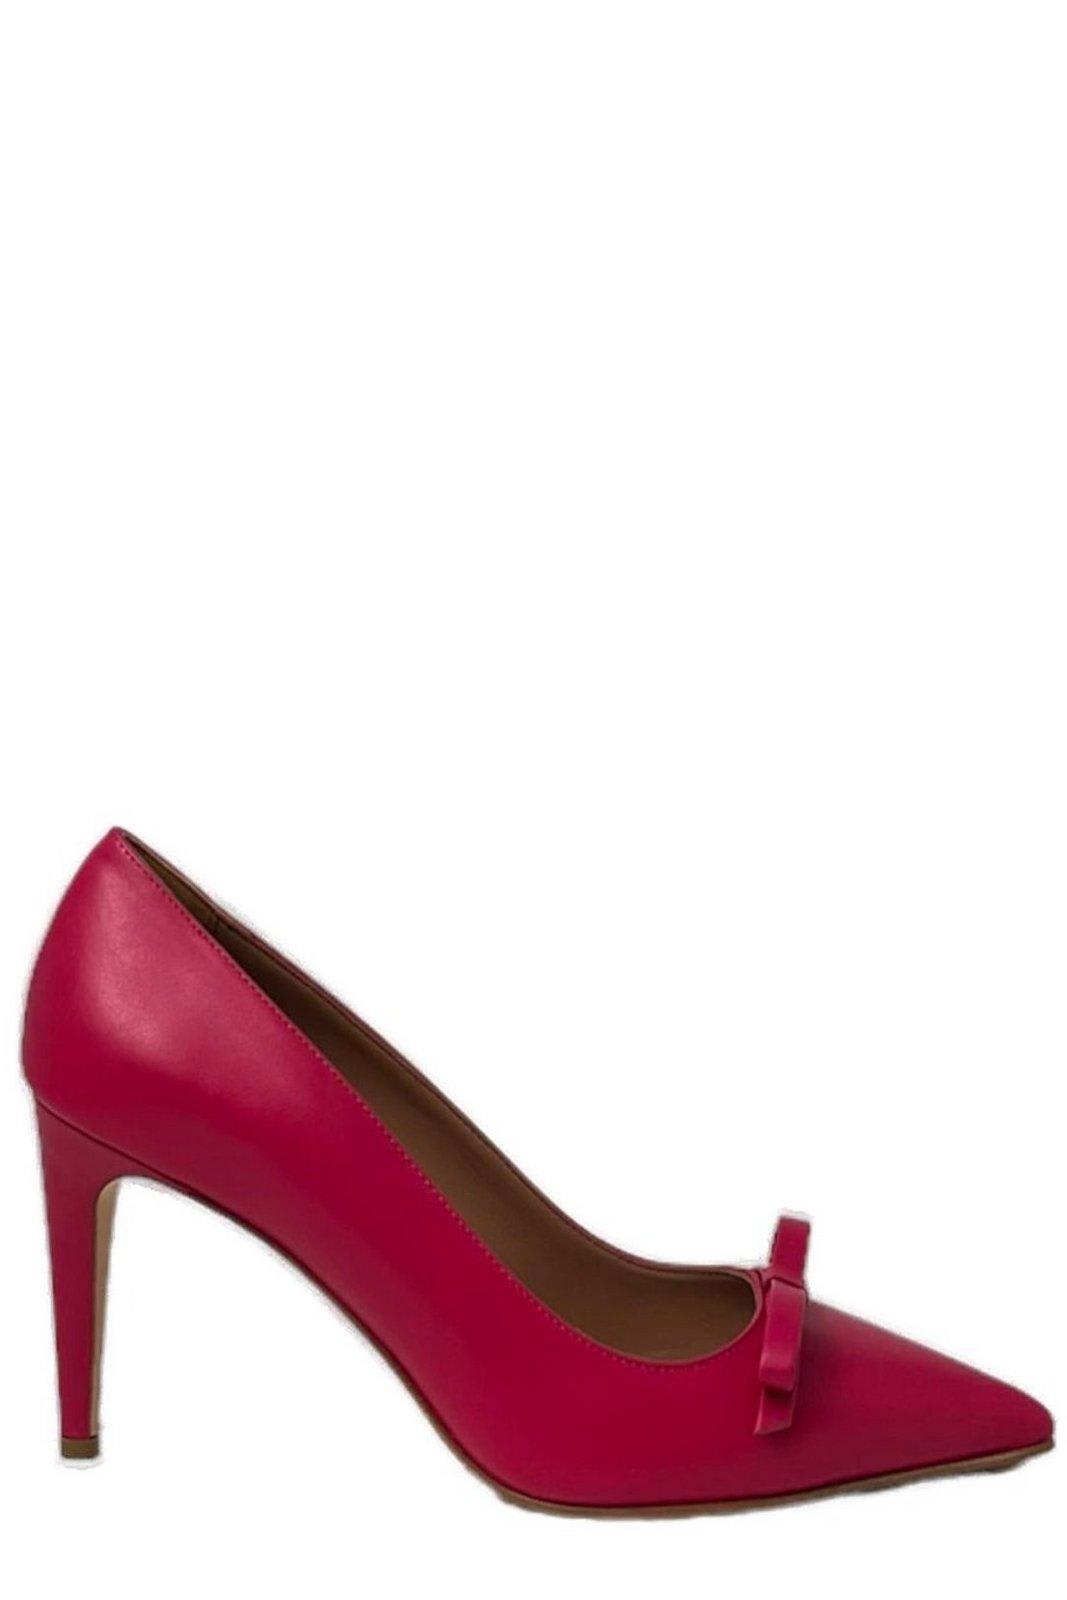 RED VALENTINO REDVALENTINO BOW-DETAILED POINTED TOE PUMPS RED VALENTINO